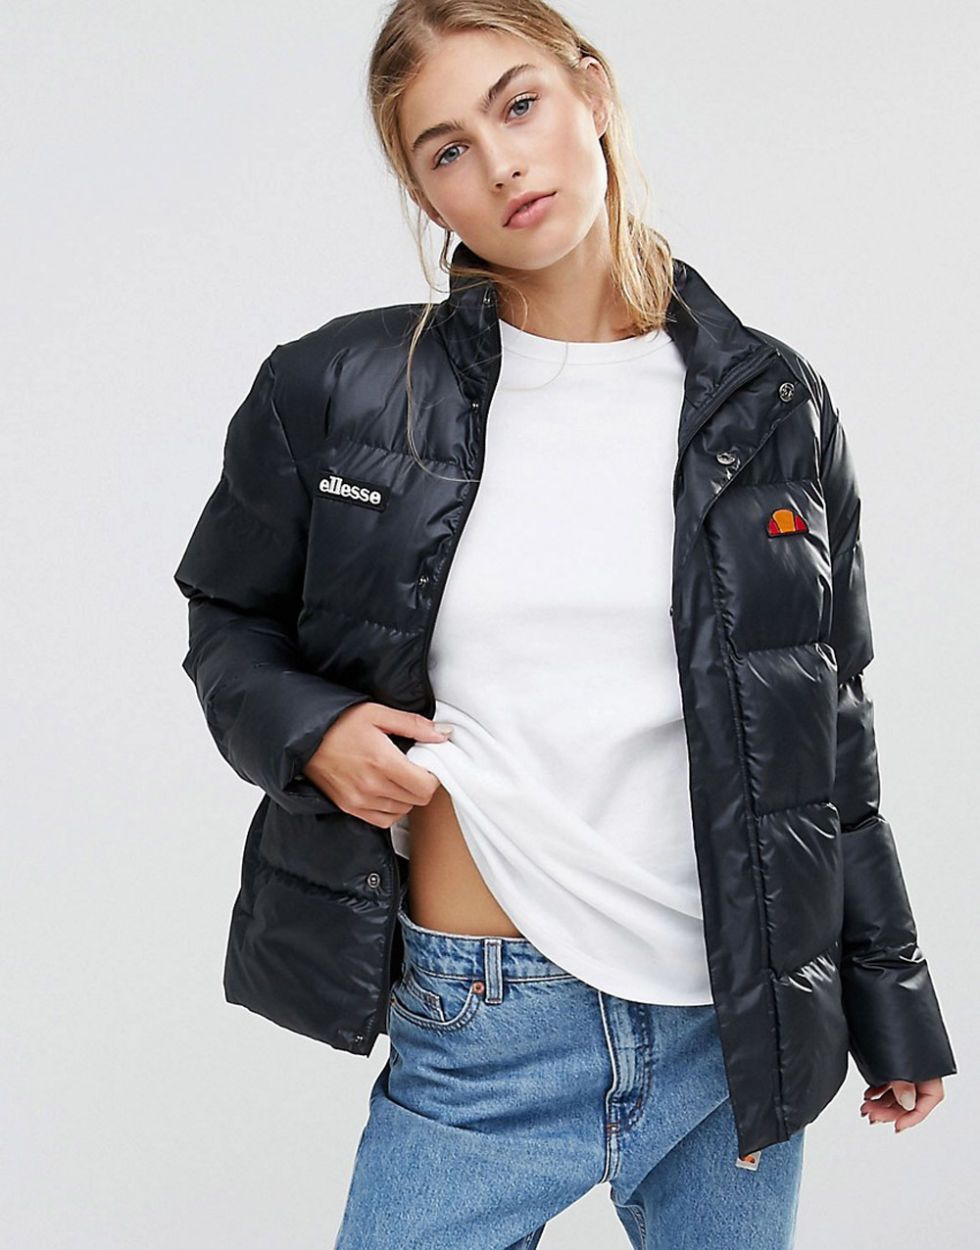 <p>Black puffer, £75, <a href="http://www.asos.com/ellesse/ellesse-oversized-heavy-padded-jacket/prod/pgeproduct.aspx?iid=6625342&clr=Black&SearchQuery=Puffer&pgesize=36&pge=0&totalstyles=194&gridsize=3&gridrow=5&gridcolumn=3" target="_blank">Ellesse</a></p>